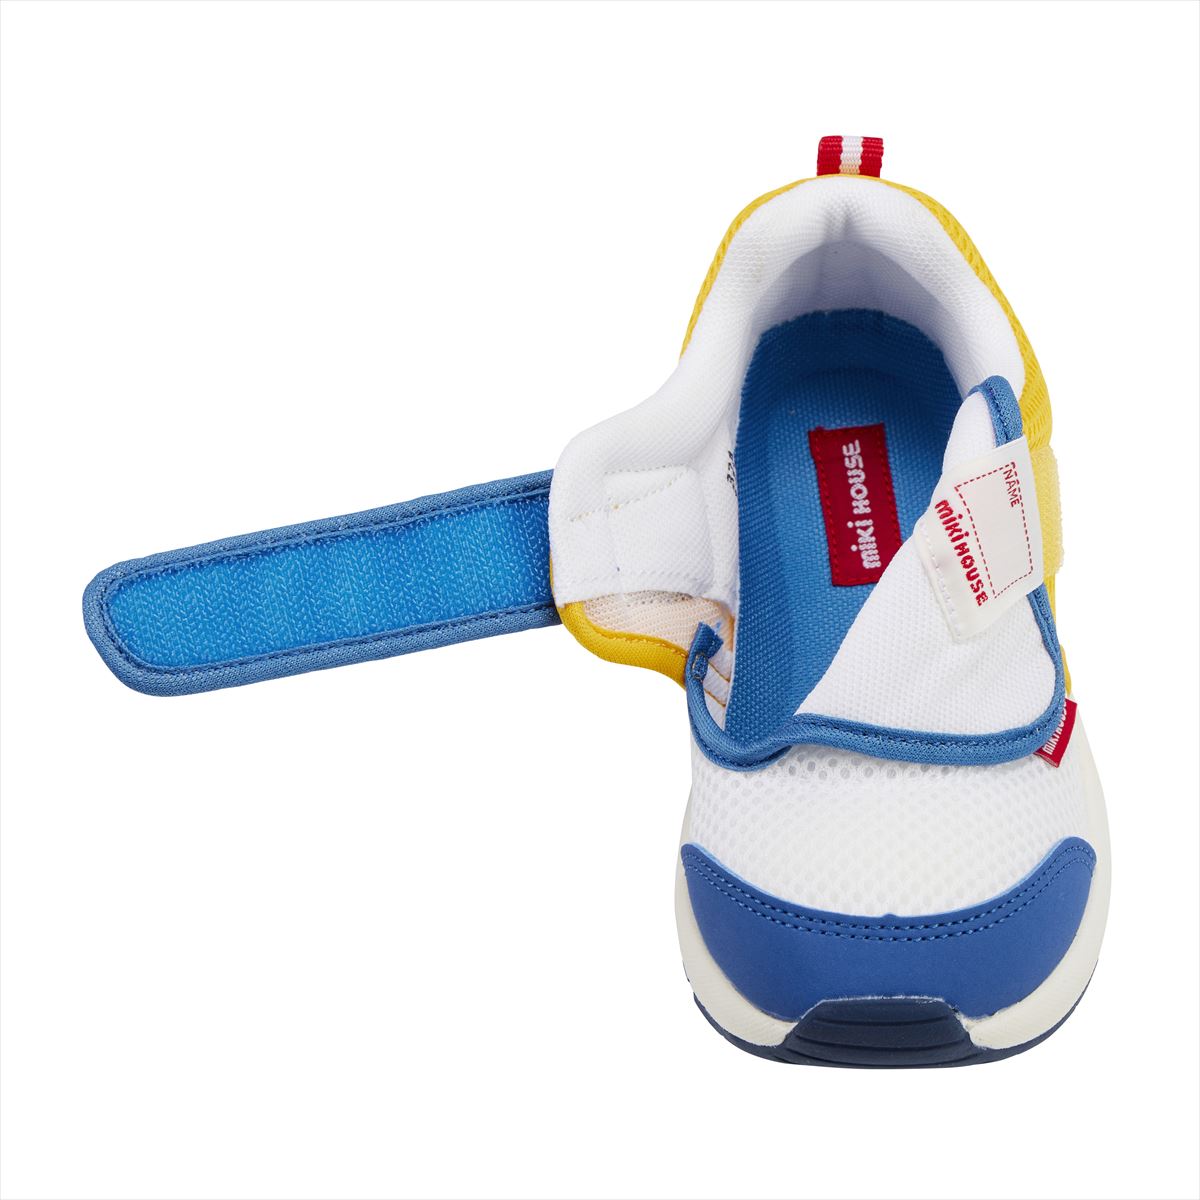 Double Russell Sneakers for Kids - Summer Breeze